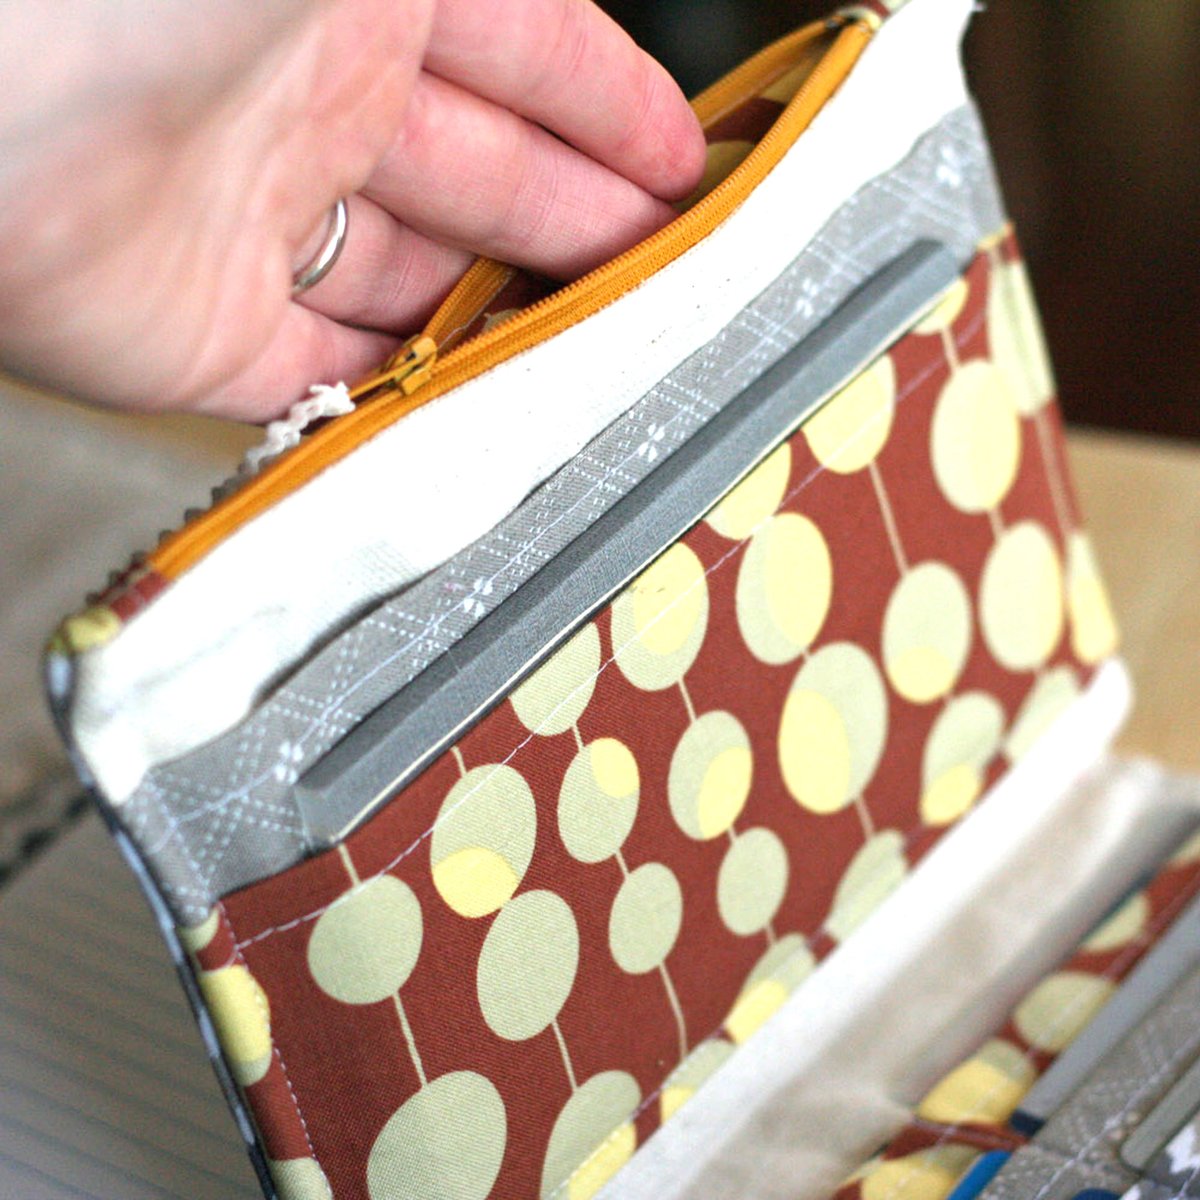 Image of 3 Layer Clutch Wallet PDF Sewing Pattern